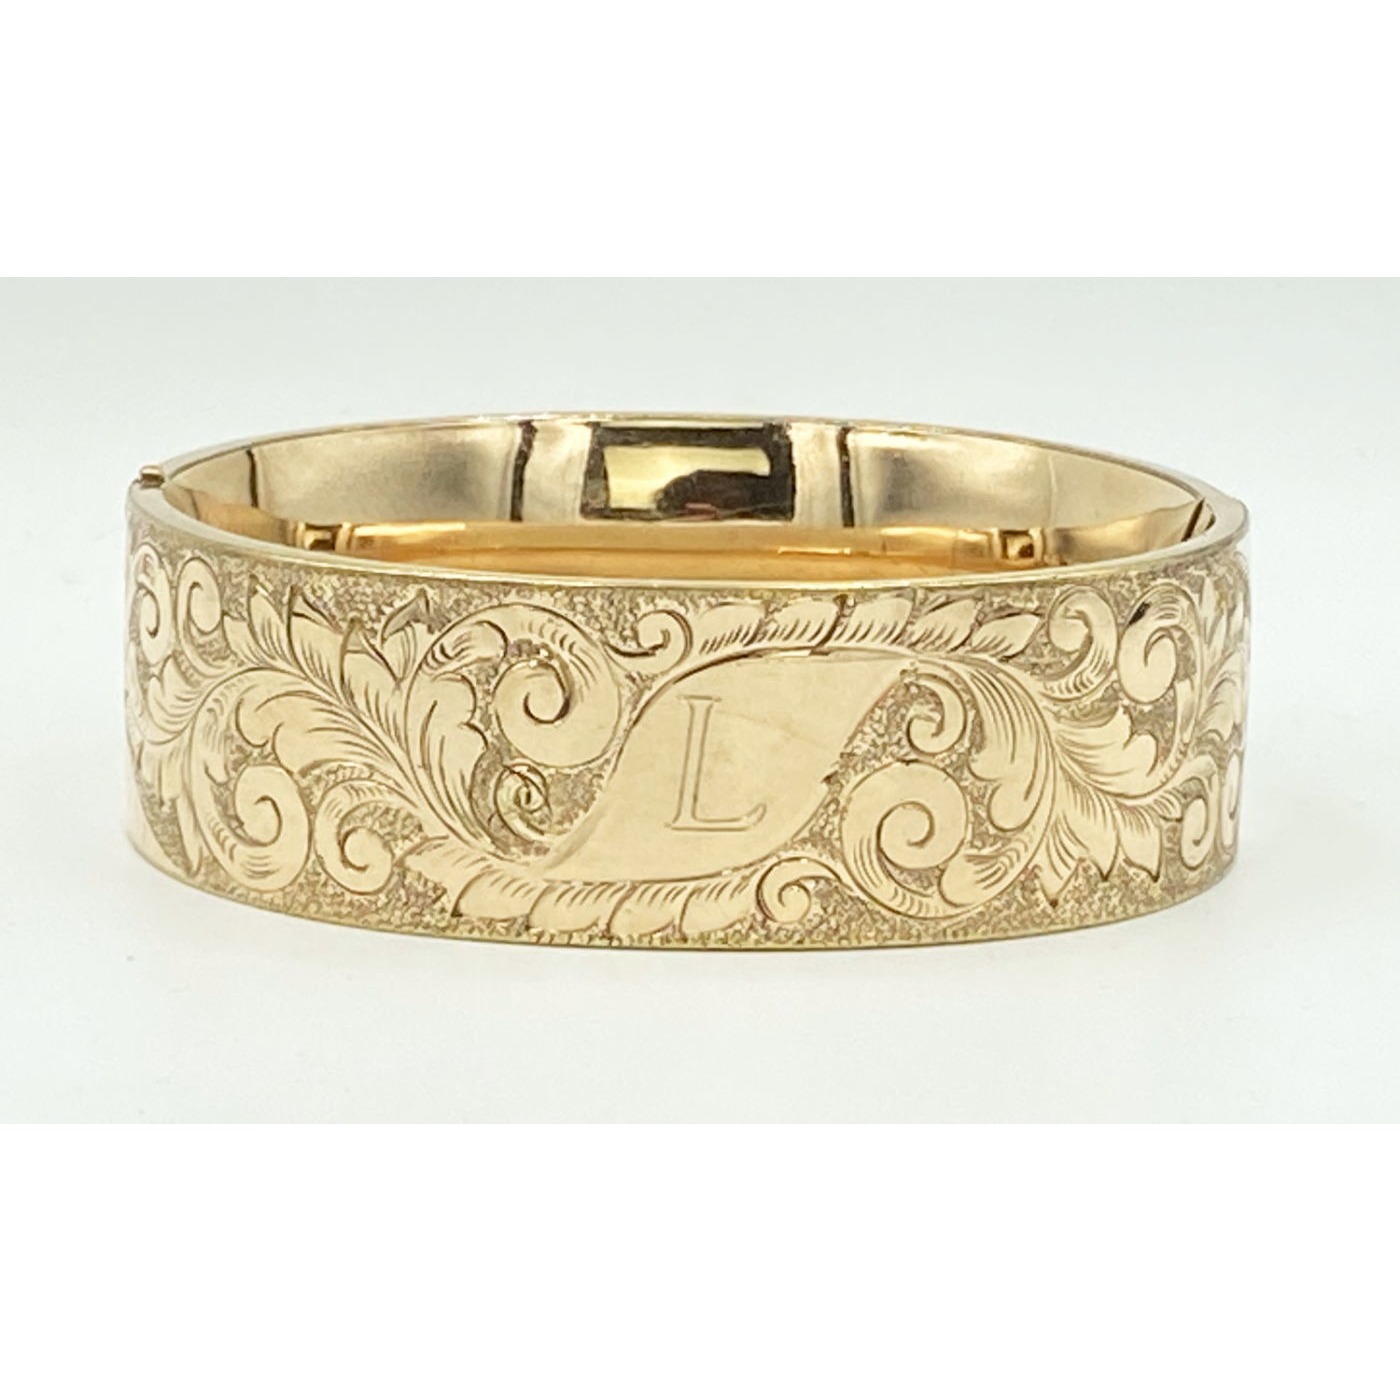 Outstanding Wide "L" Elaborate Scrolling Monogram Gold-Filled Bangle